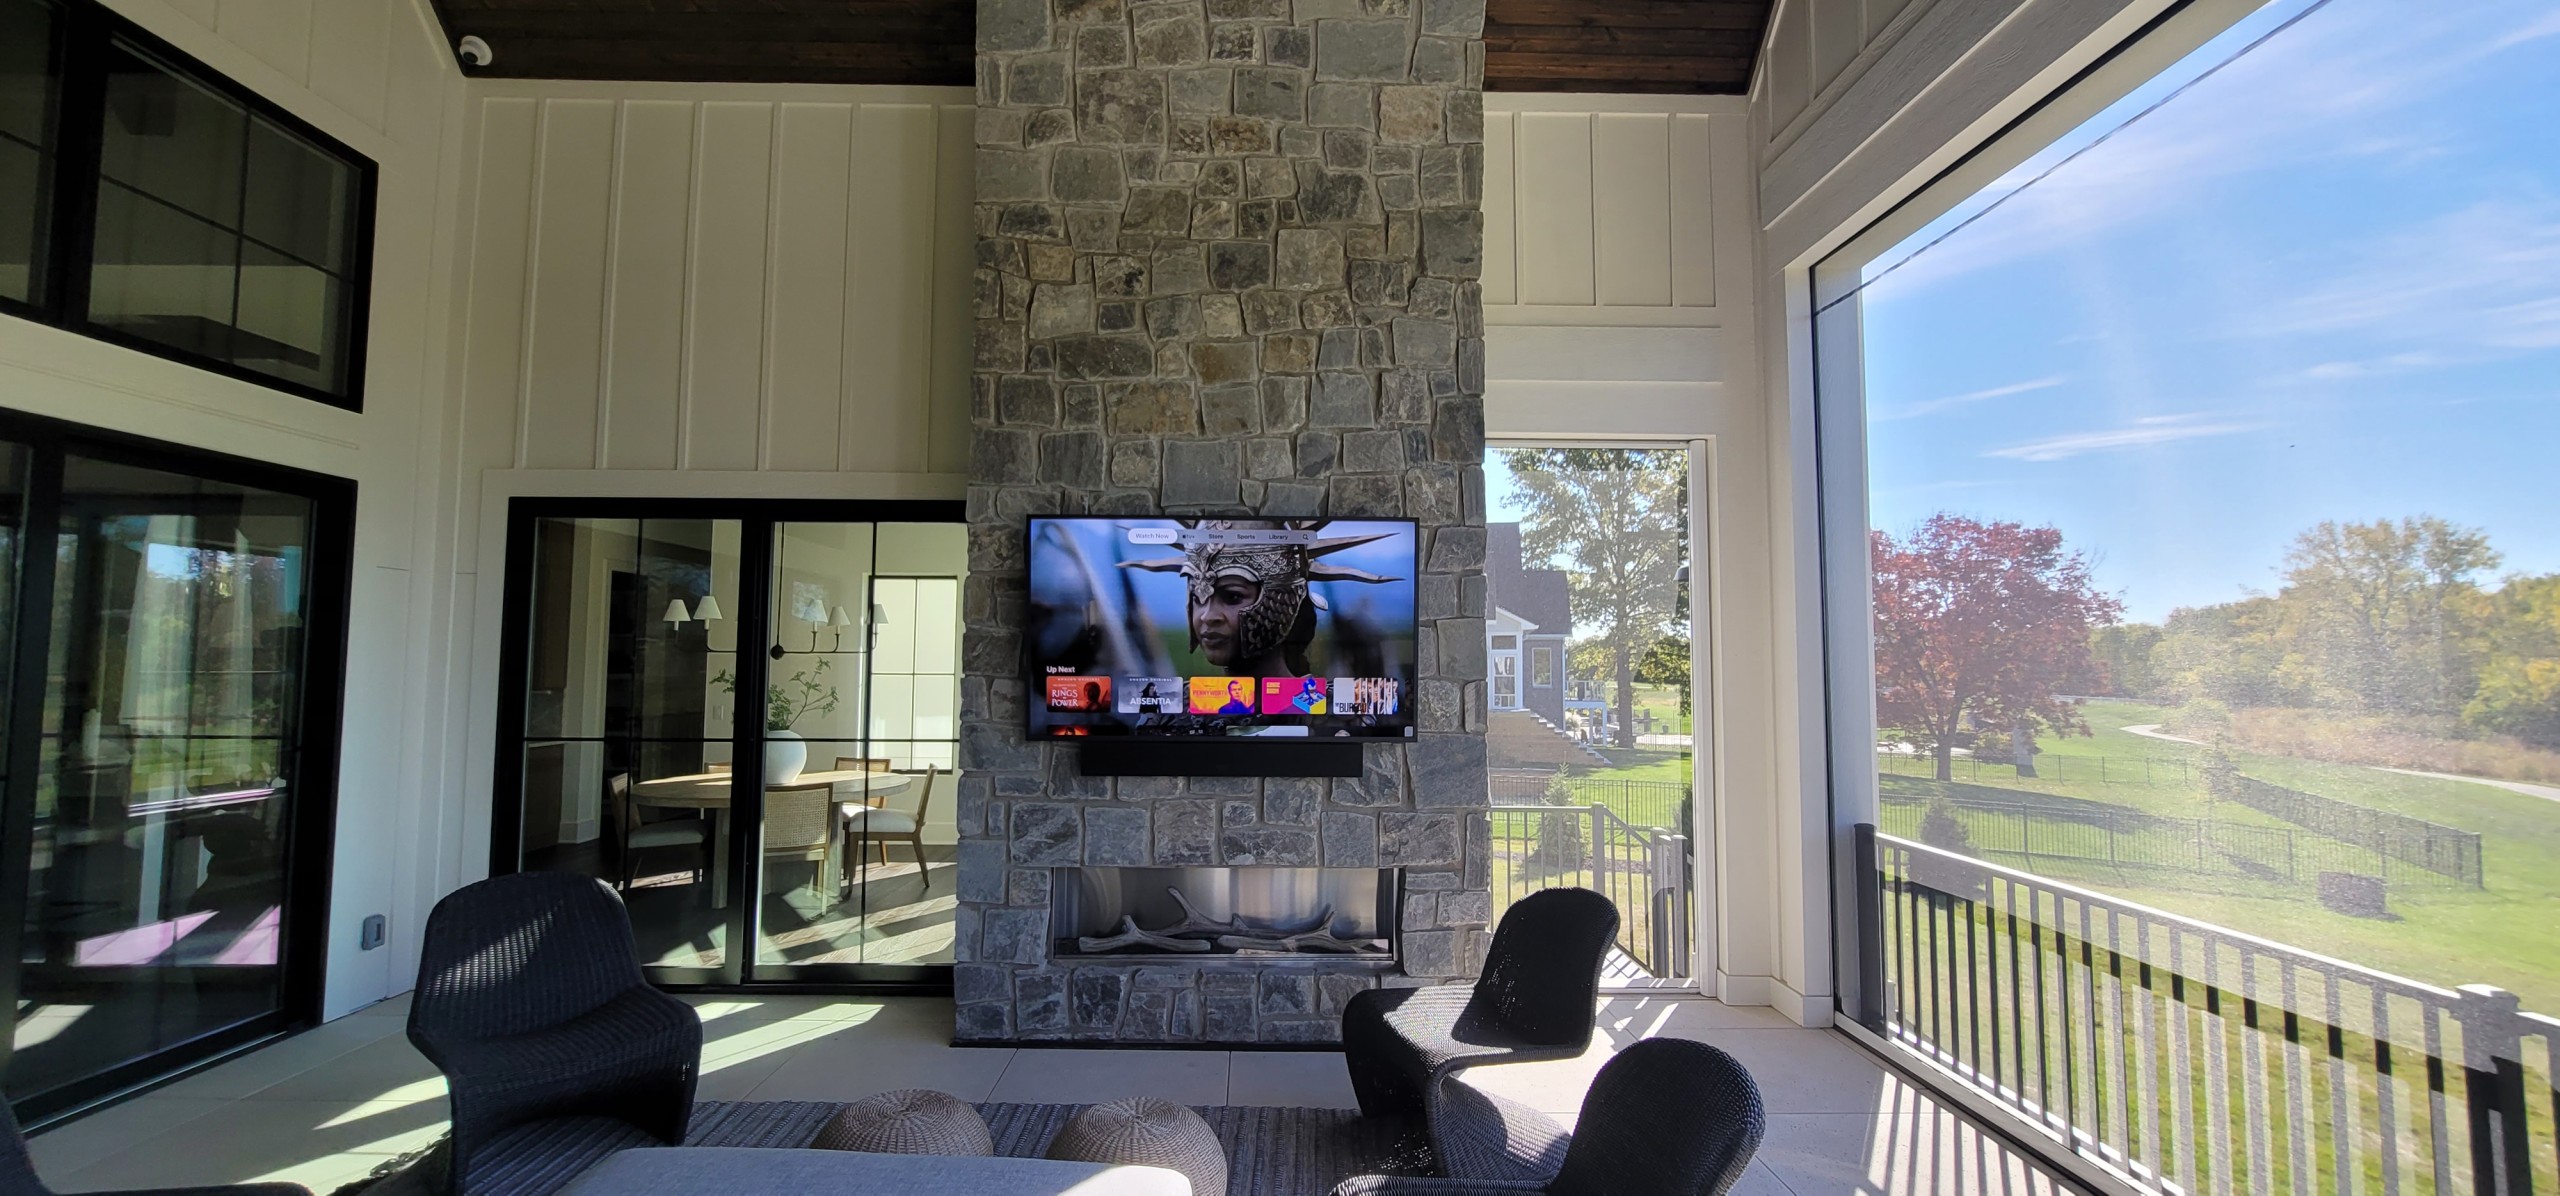 SYNC Technology Integration - Outdoor Video